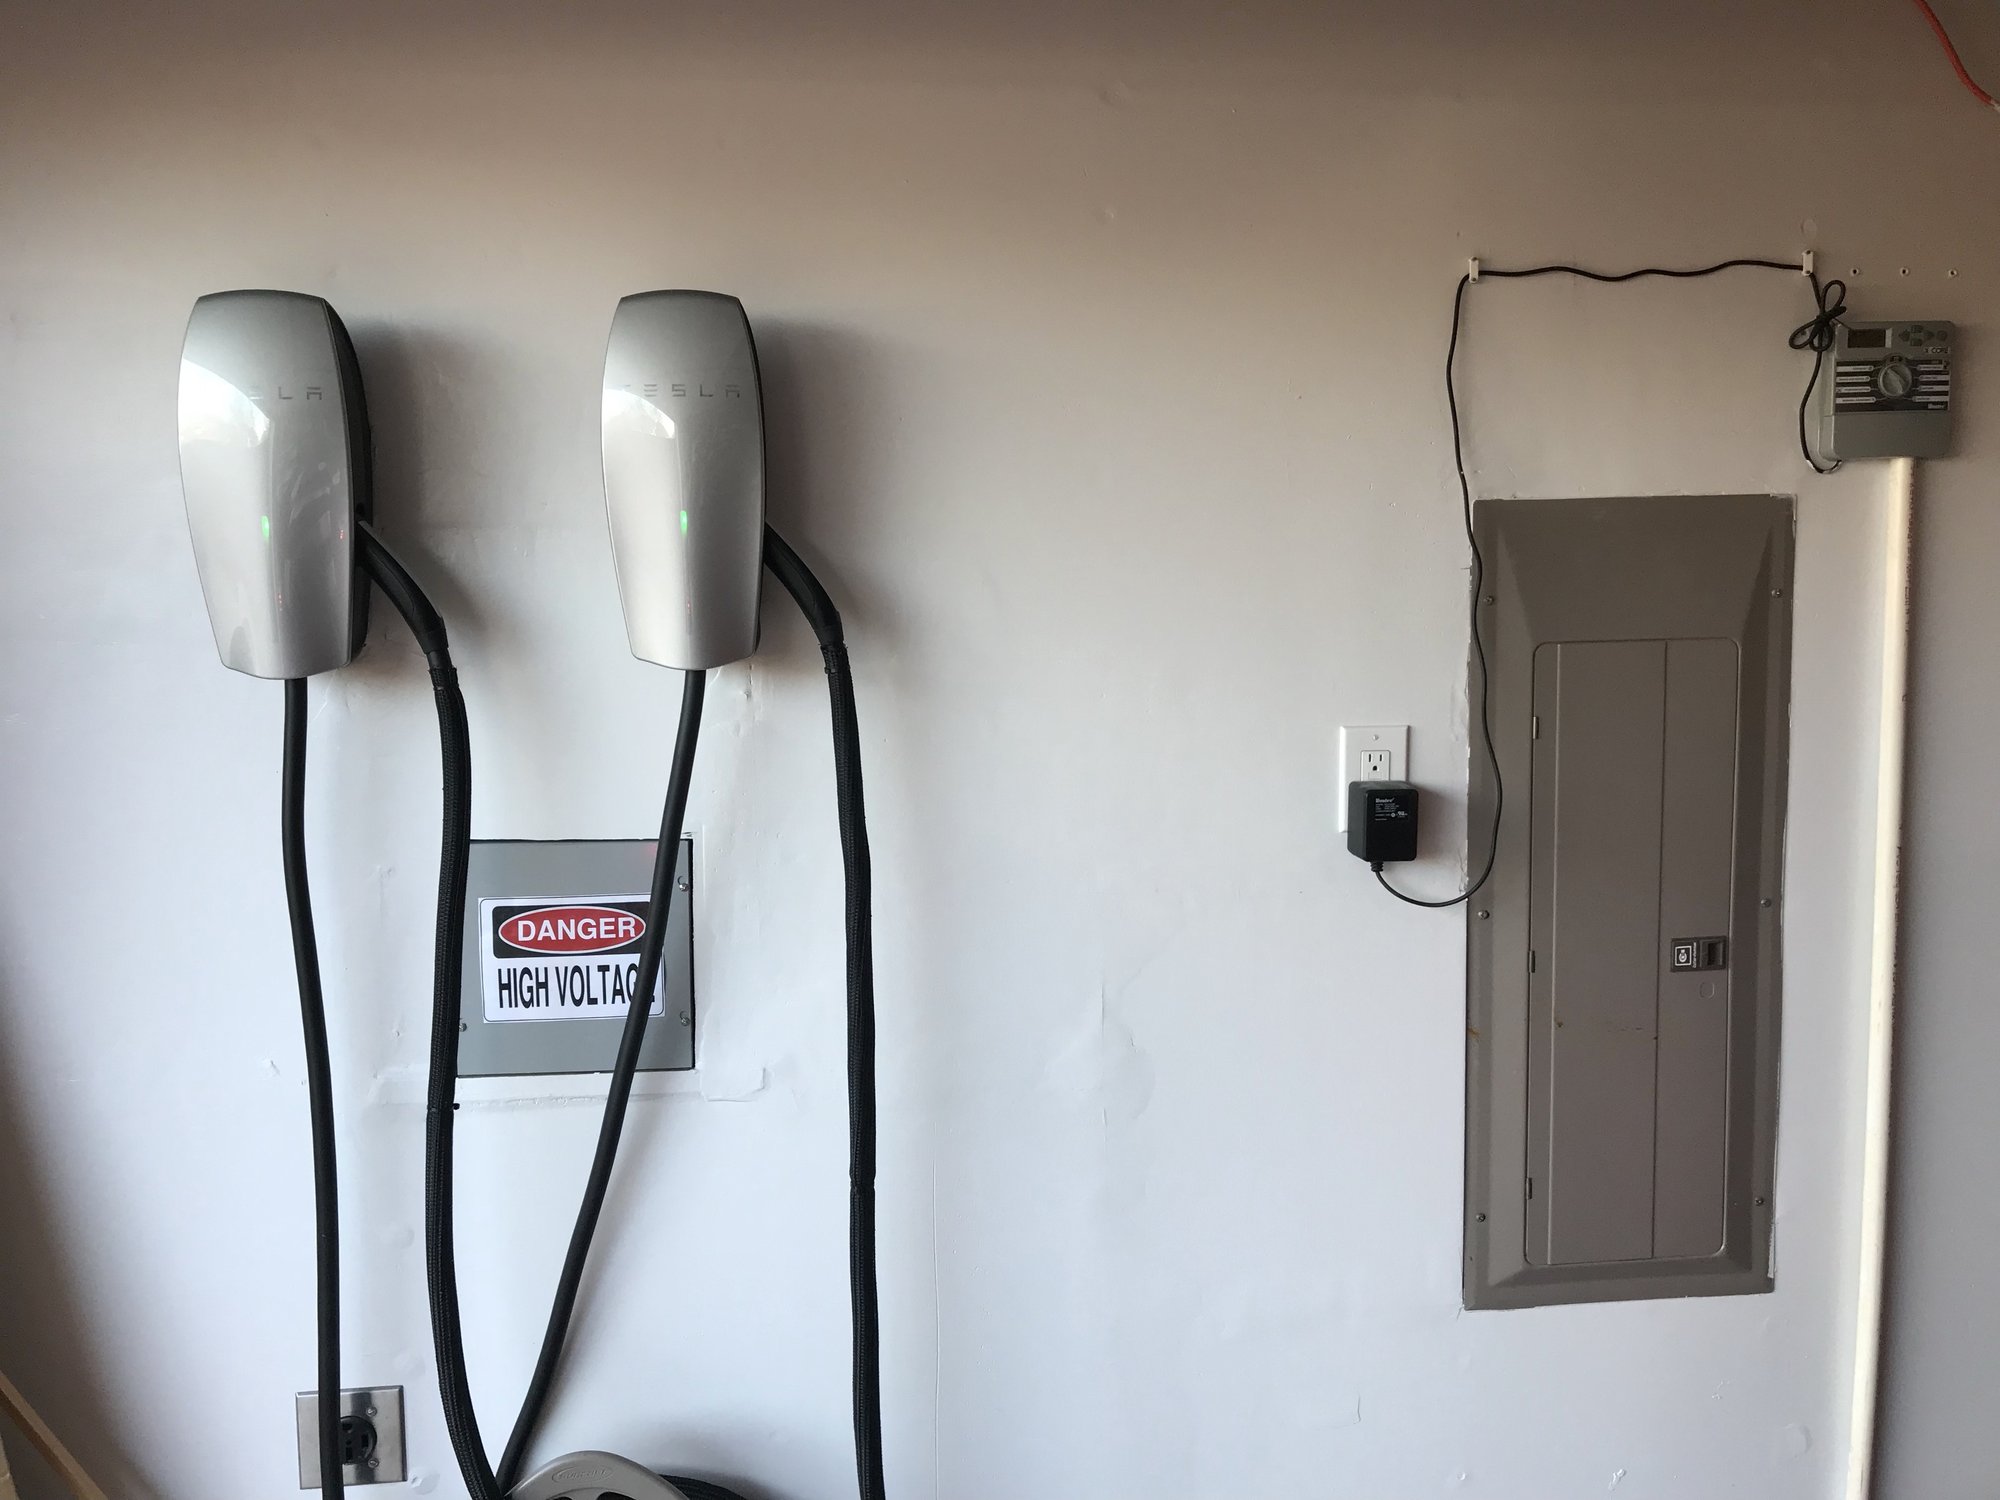 New to Tesla, Need Home Charger